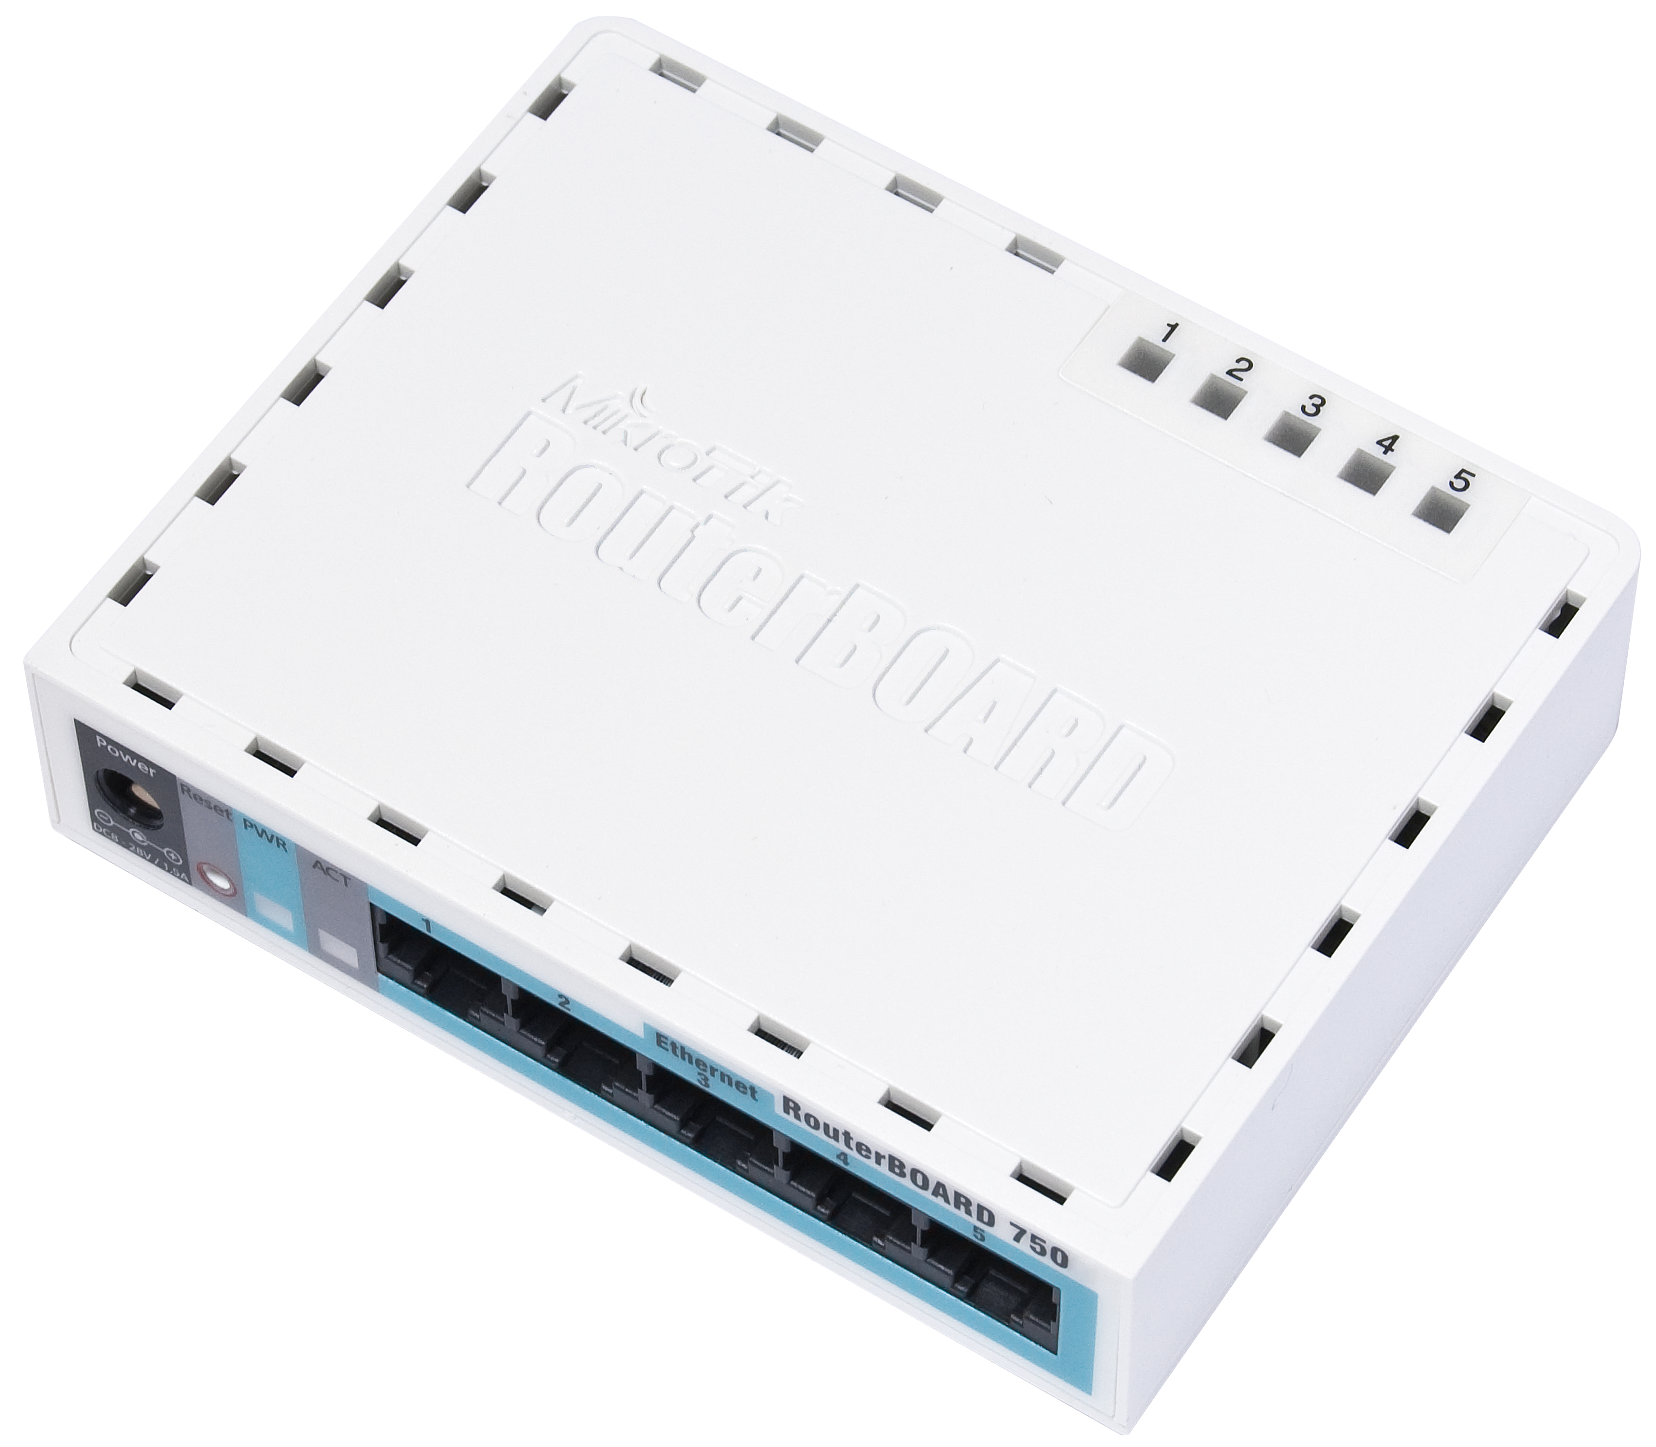 MikroTik Routers and Wireless - Products: RBPOE